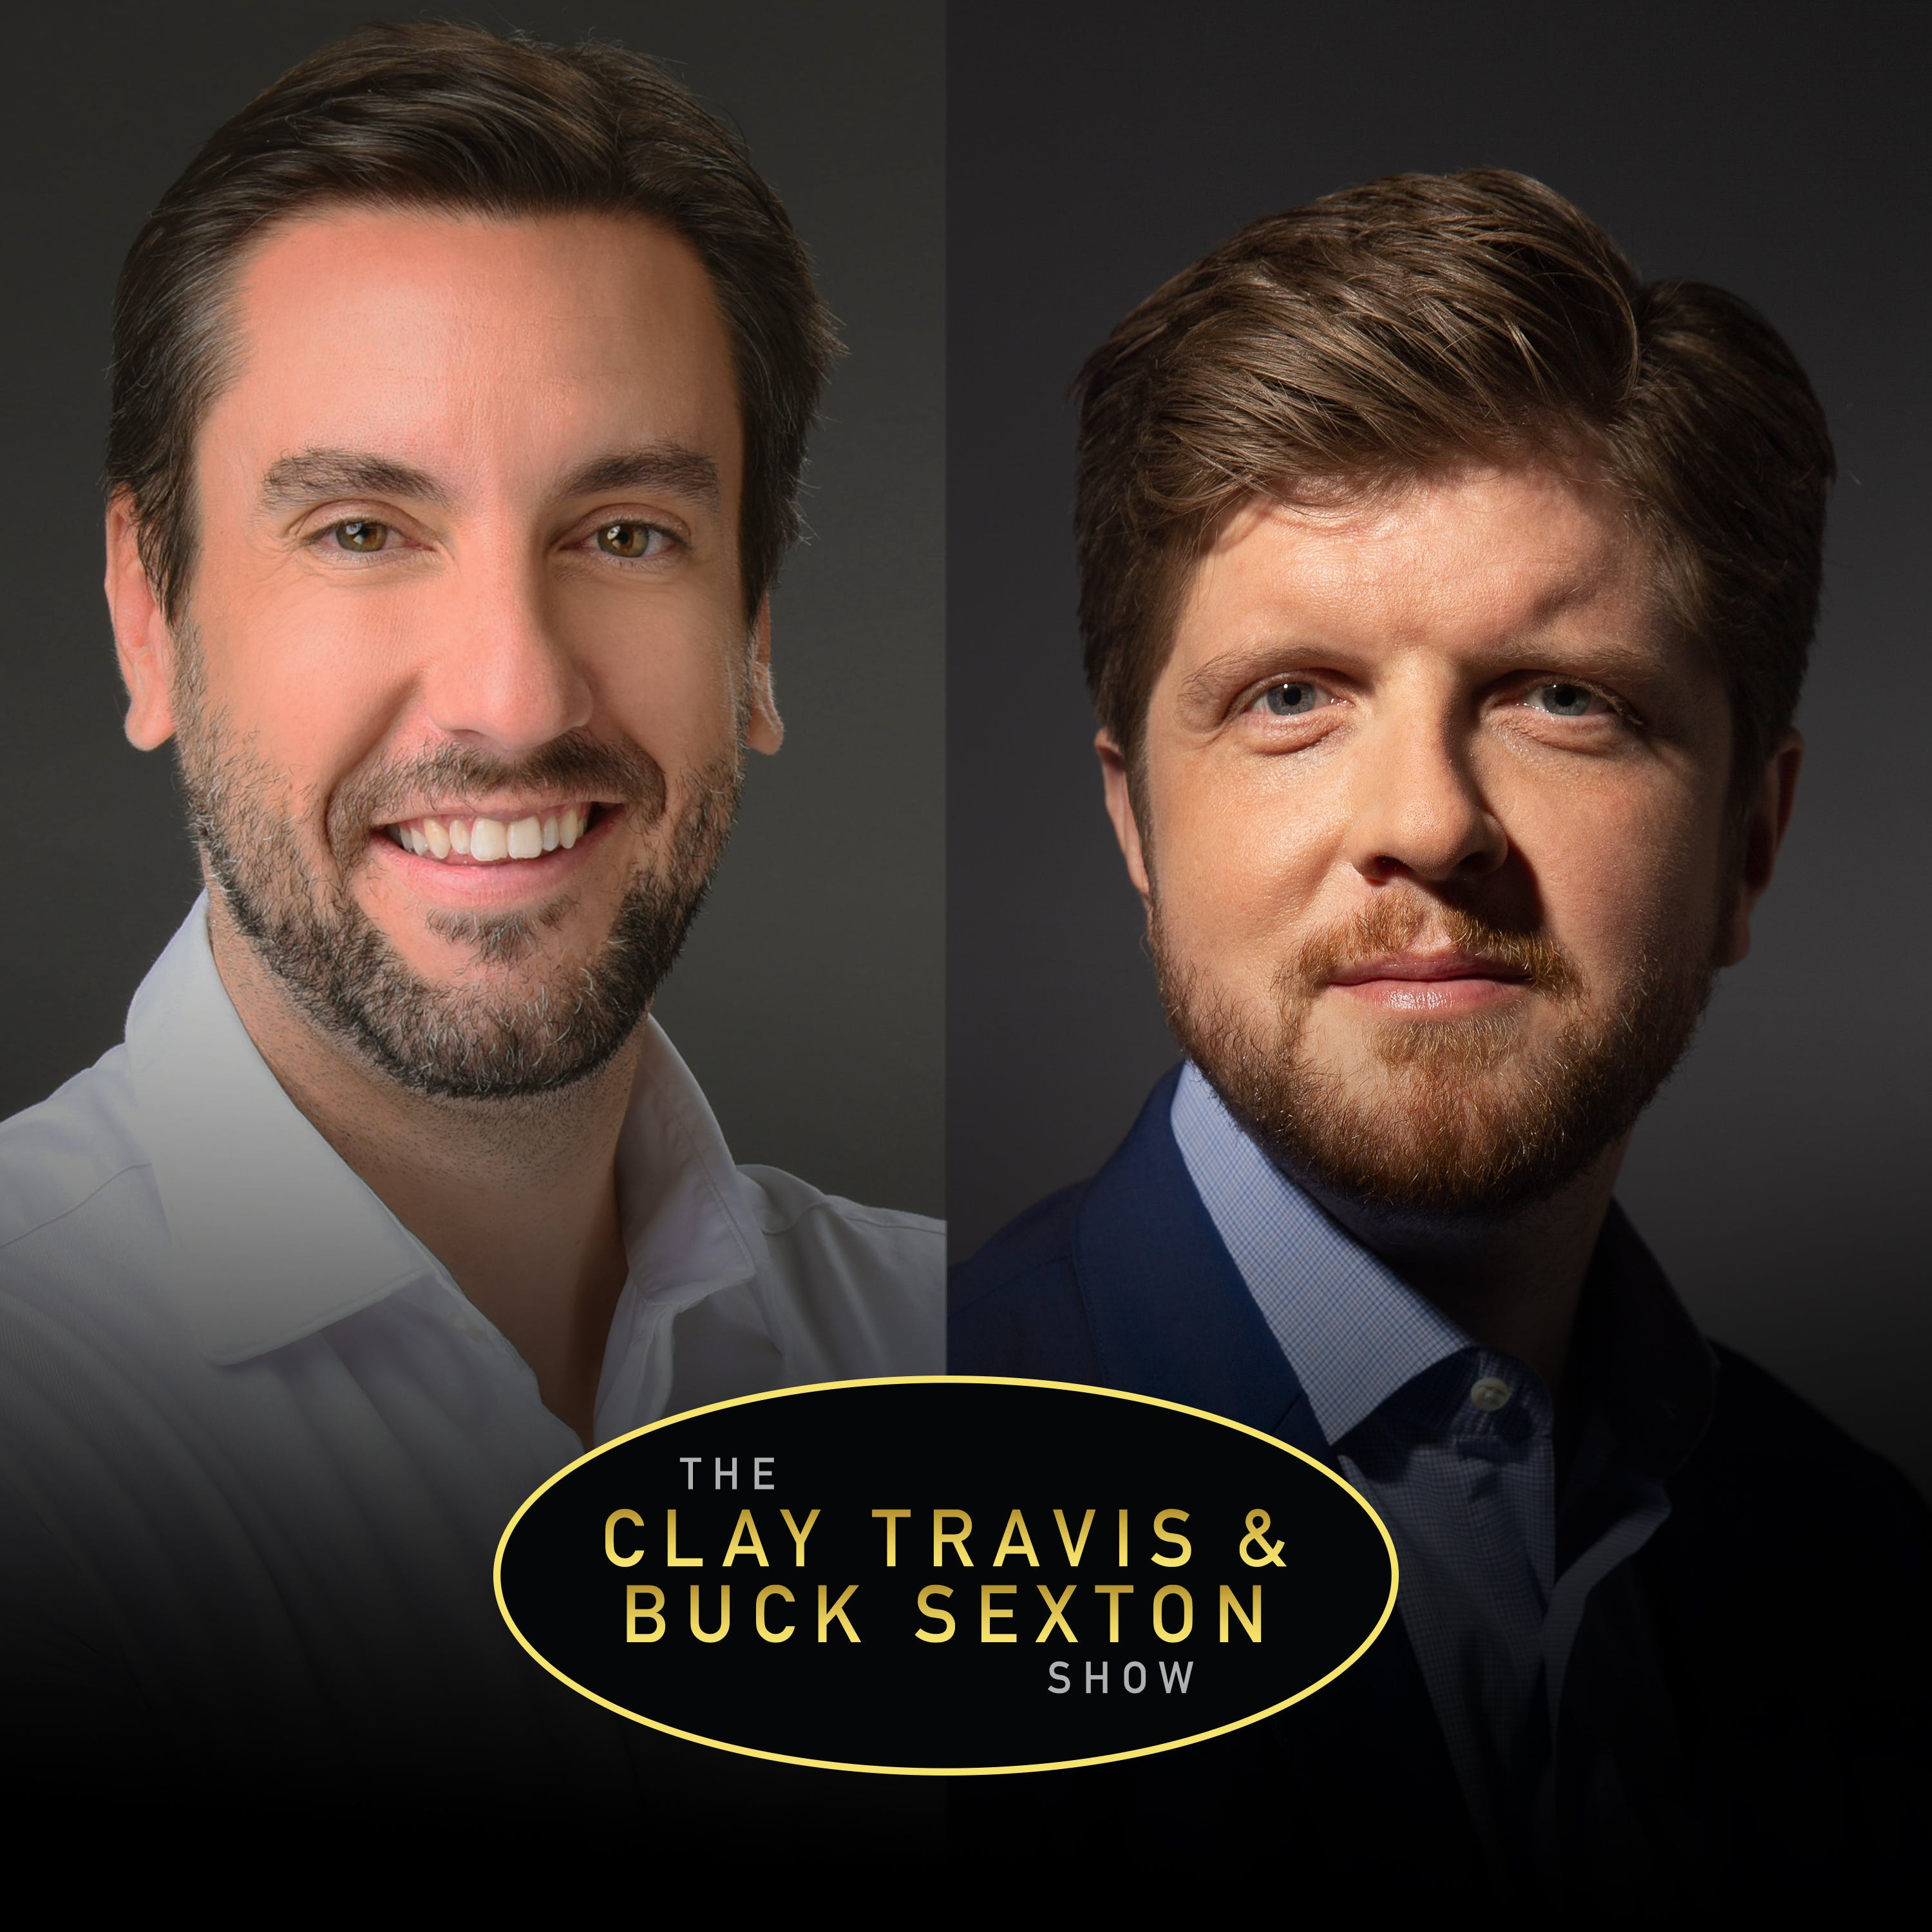 The Clay Travis and Buck Sexton Show Podcast